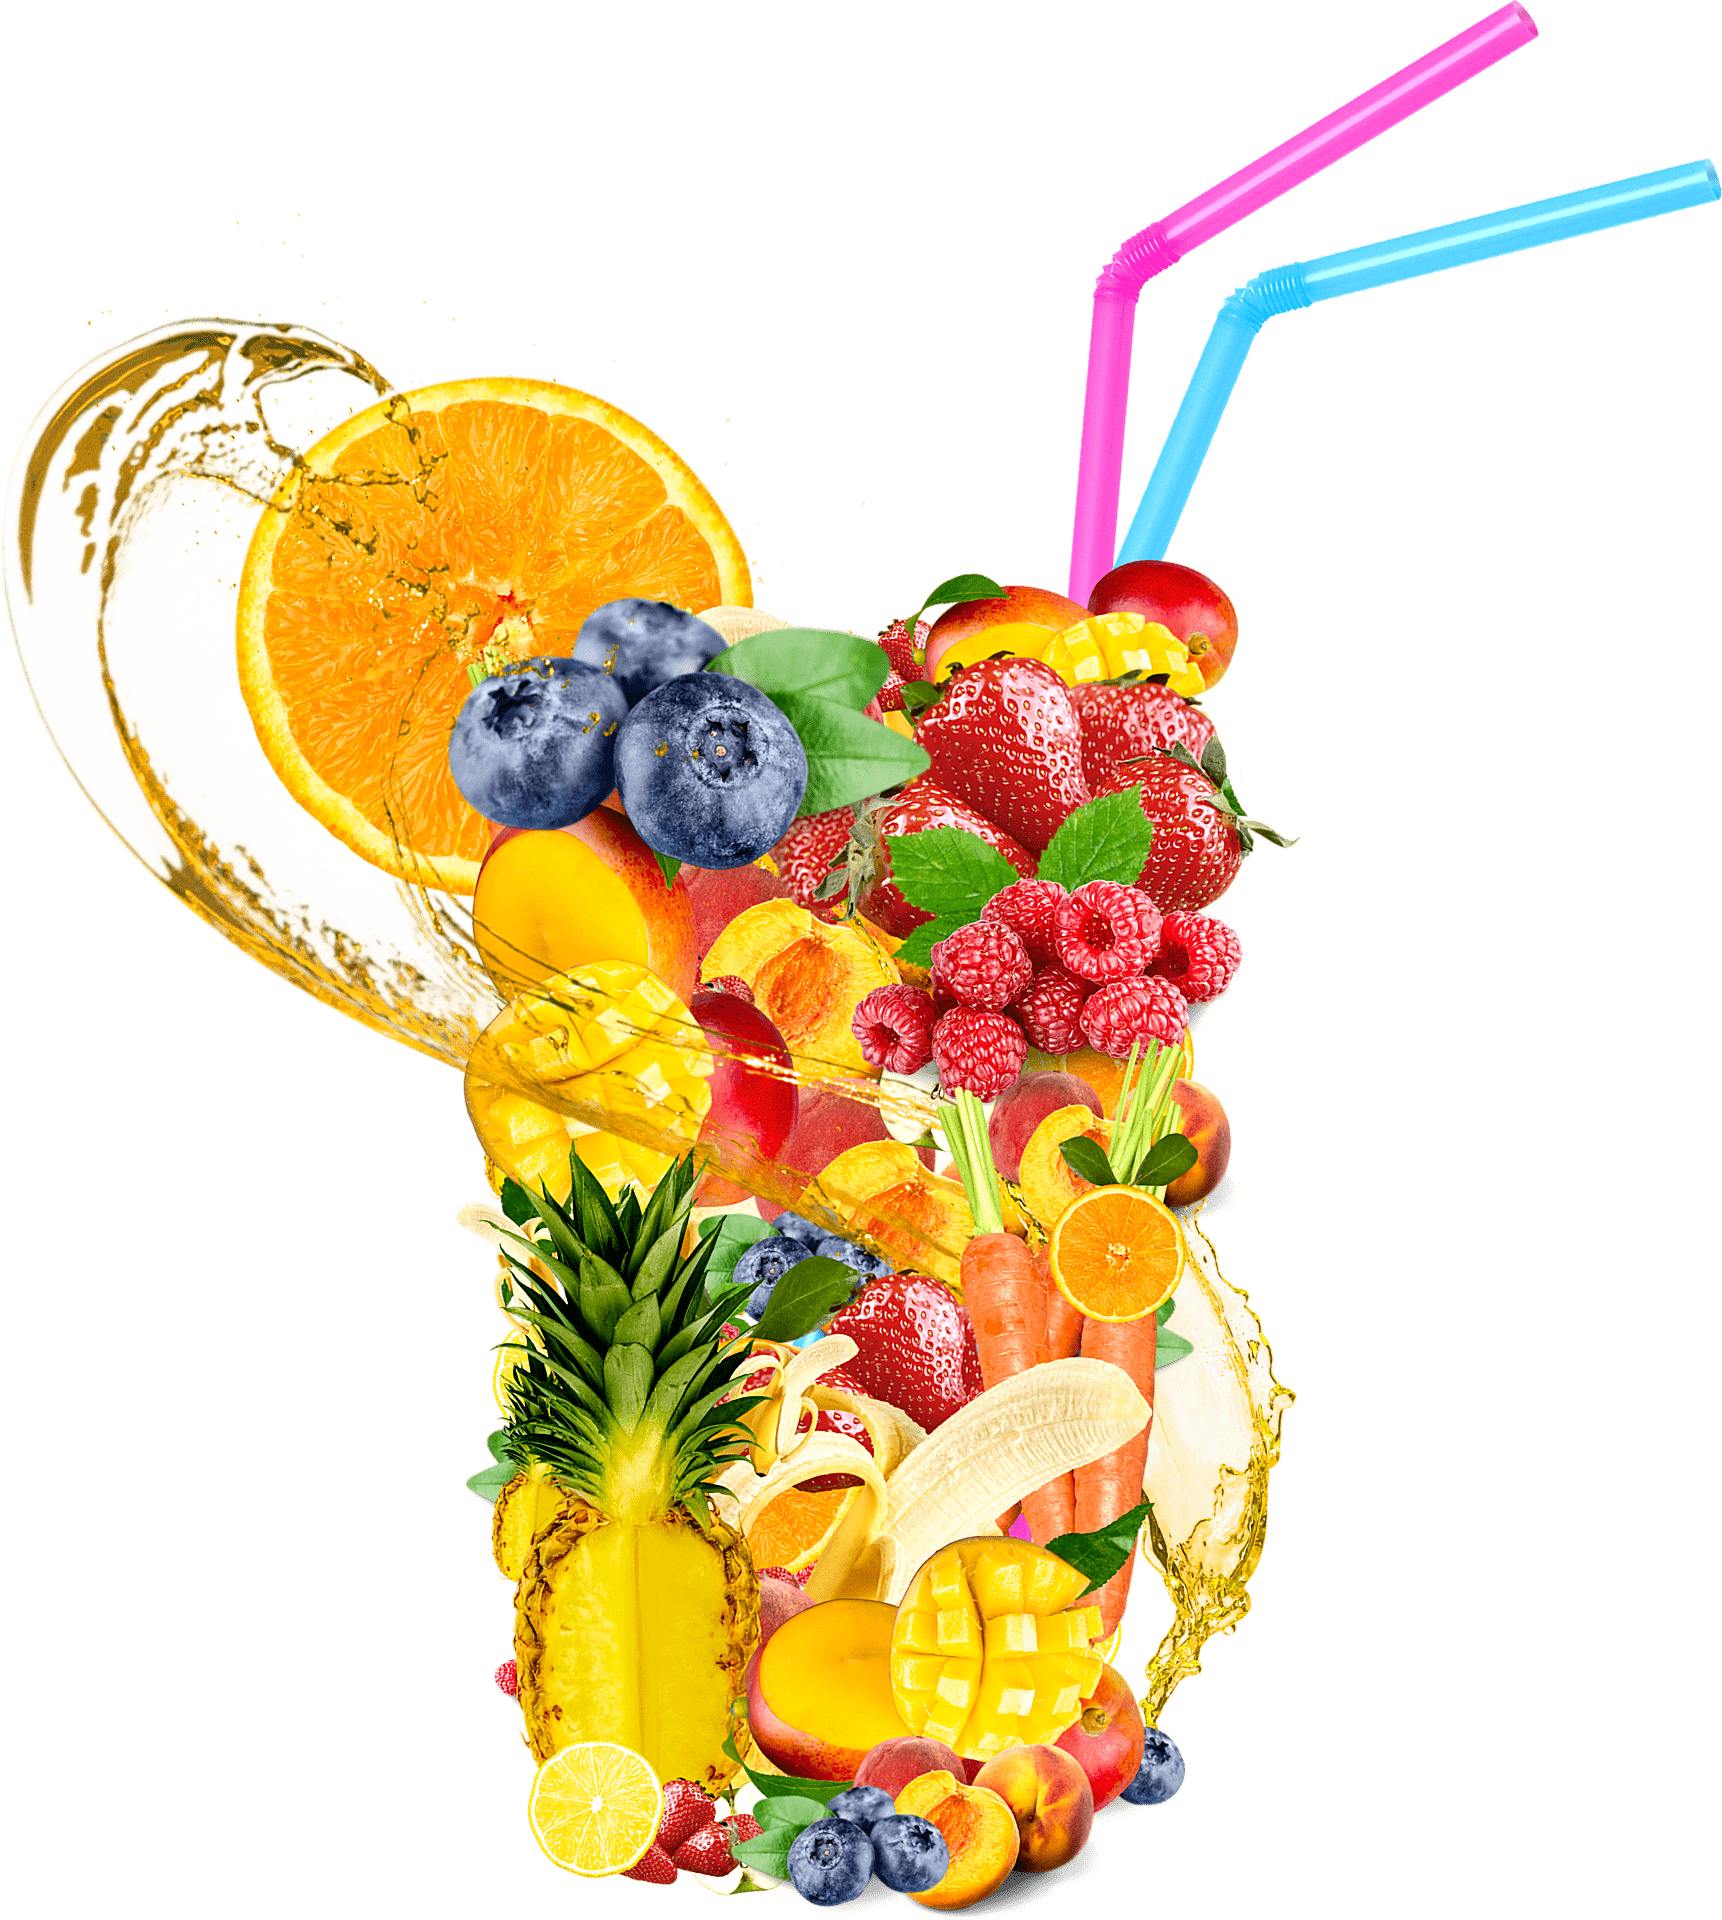 image of Fruits and Vegetables to Juice